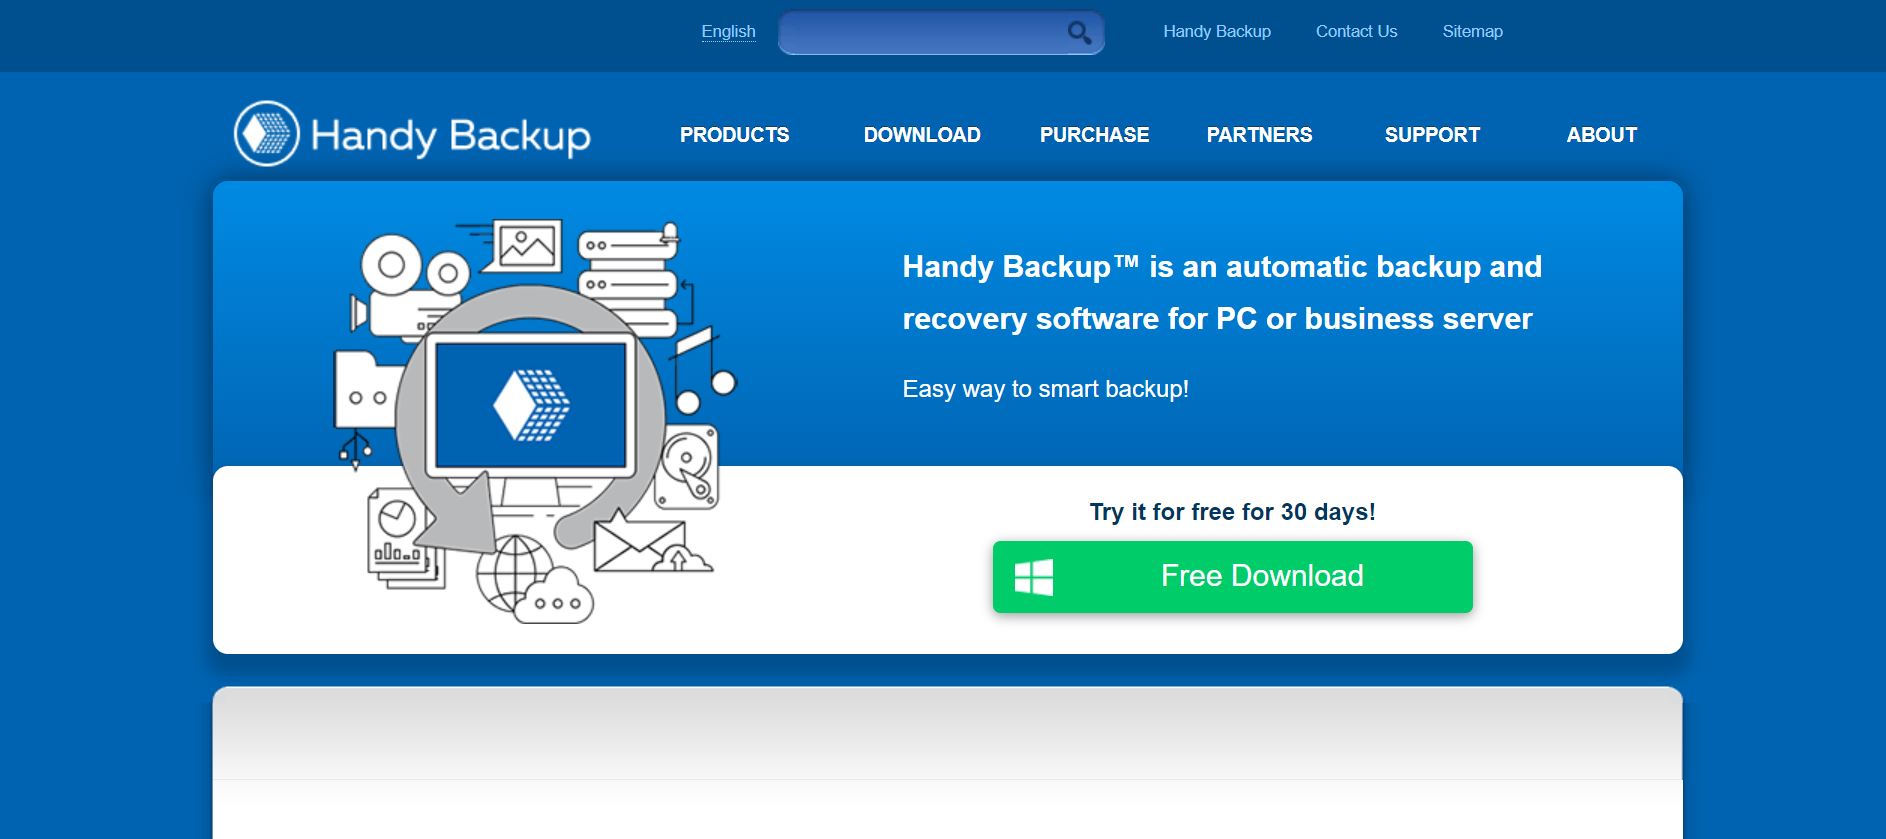 Find detailed information about Handy Backup